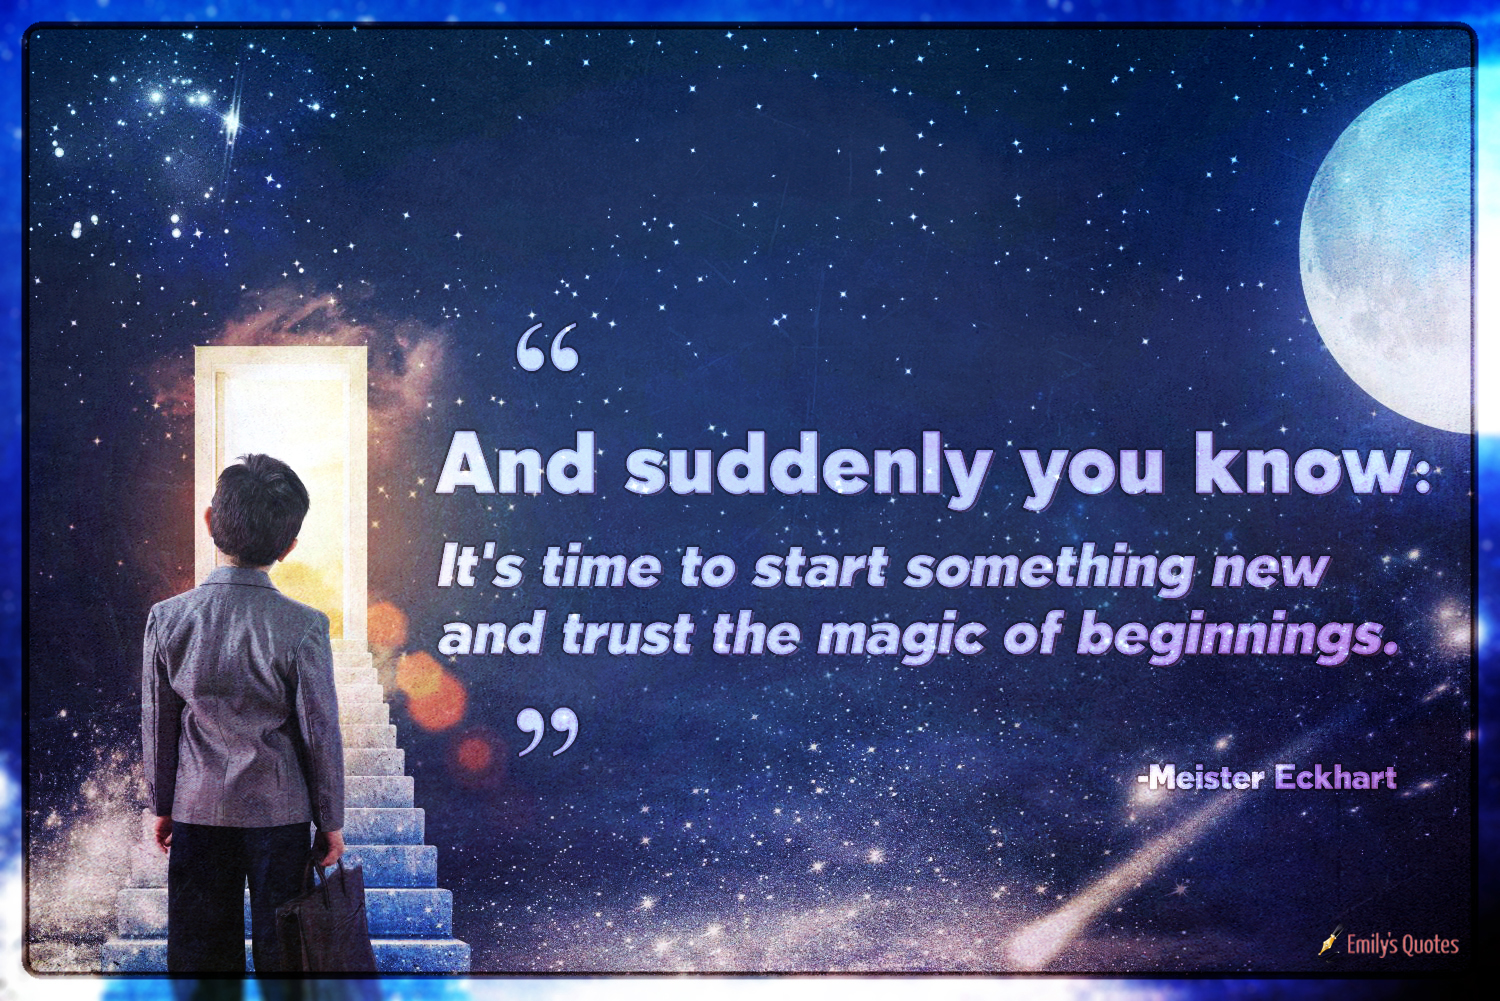 And suddenly you know: It’s time to start something new and trust the magic of beginnings